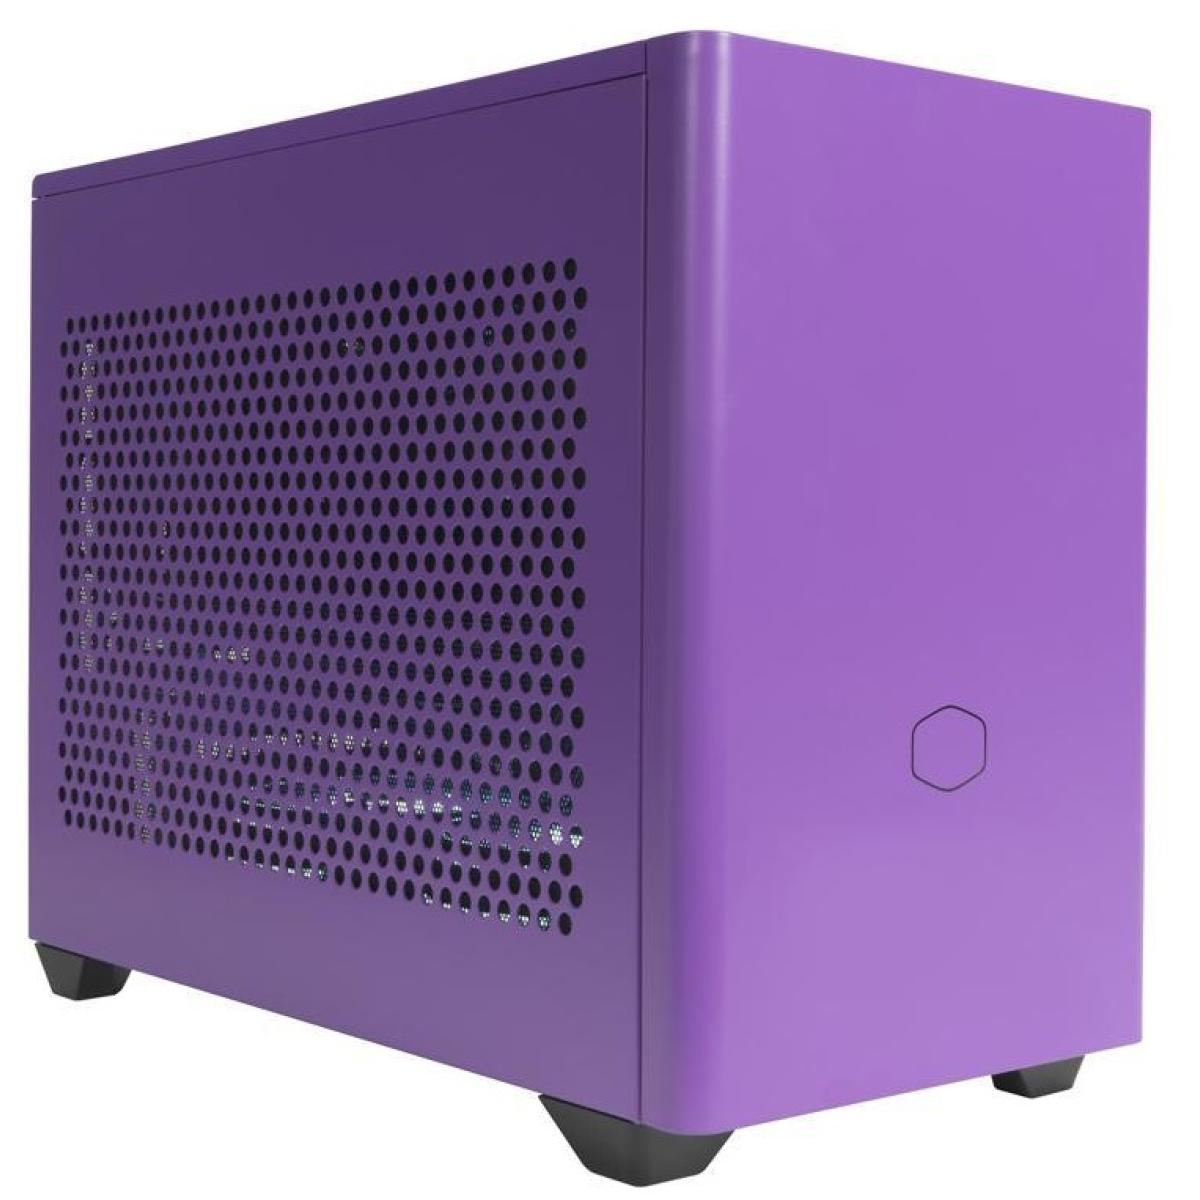 Cooler Master NR200P Purple SFF Small Form Factor Mini-ITX Case with Vented Panel, Triple-slot GPU,Nightshade Purple Color (Only 1 Left)